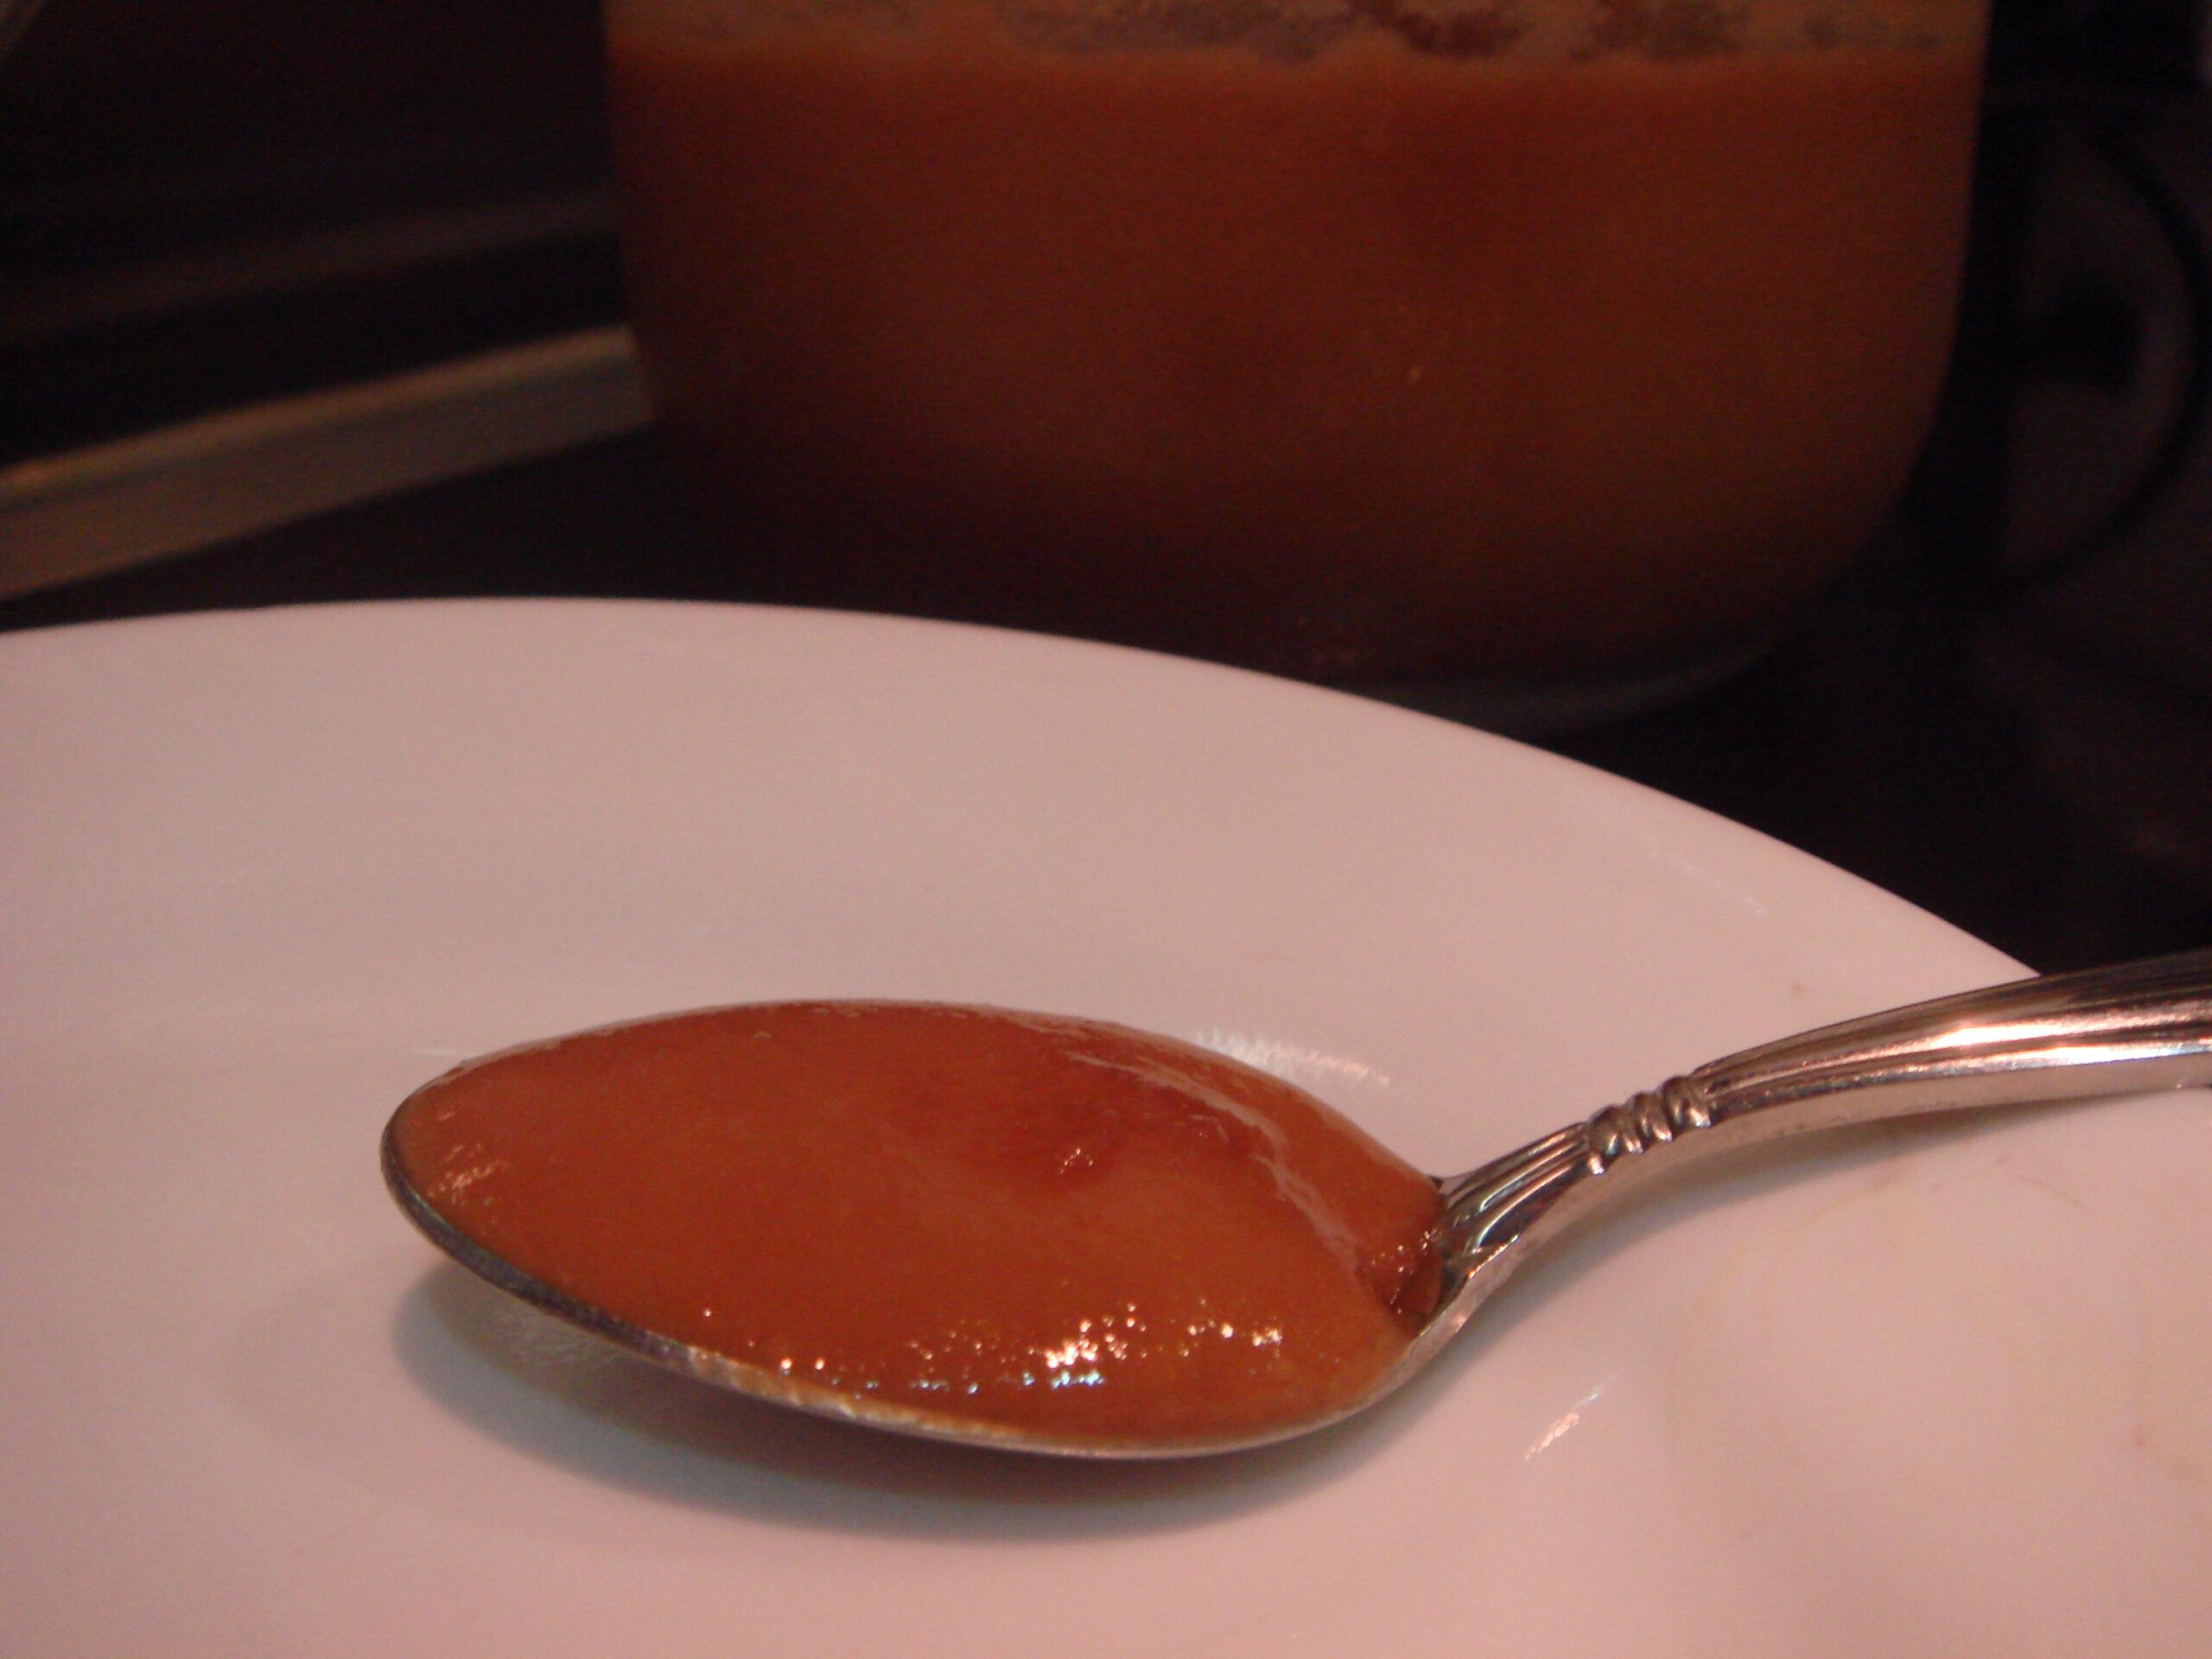  Behold the caramel-y goodness of homemade Dulce de Leche!